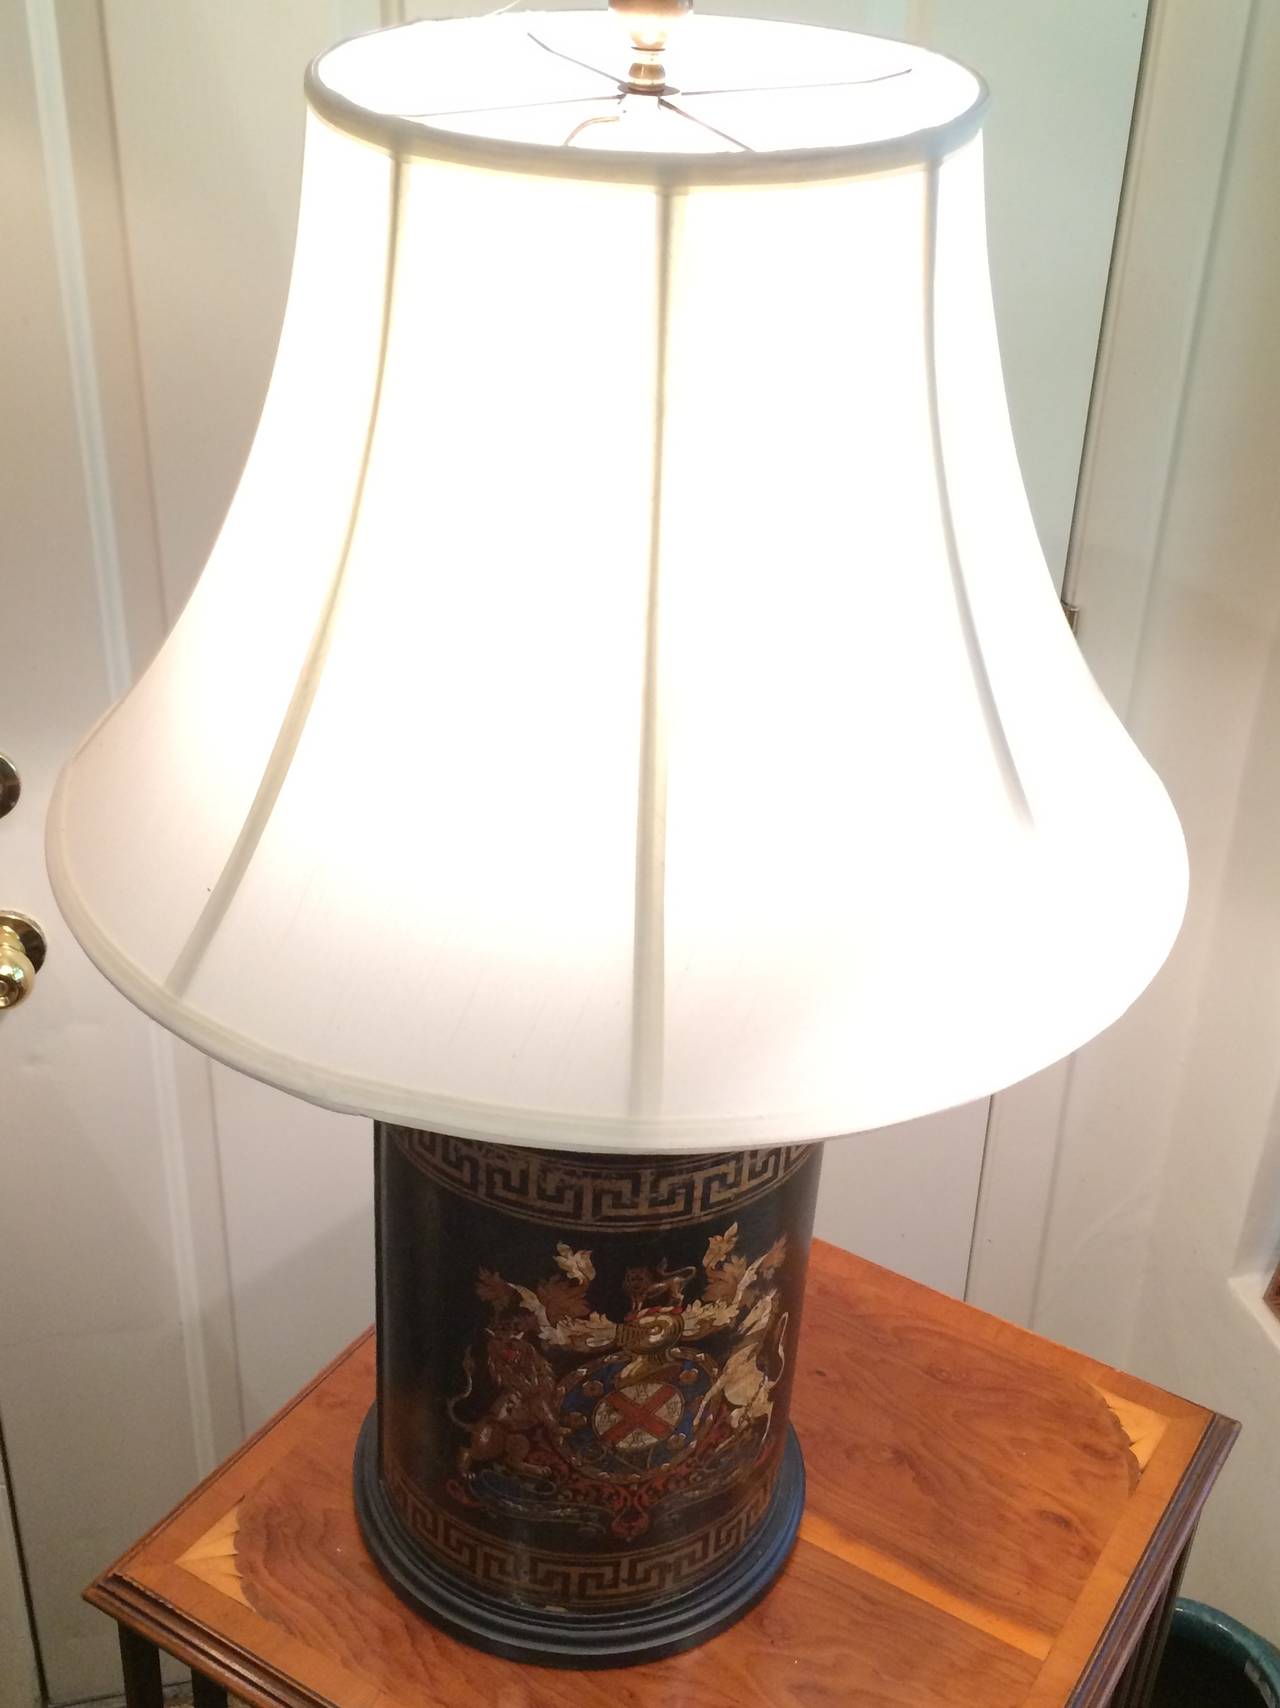 Antique Black painted tole canister mounted as lamp with handsomely illustrative English coat of arms motif and Greek key borders, early 20th century.
*Shade sold Separately.